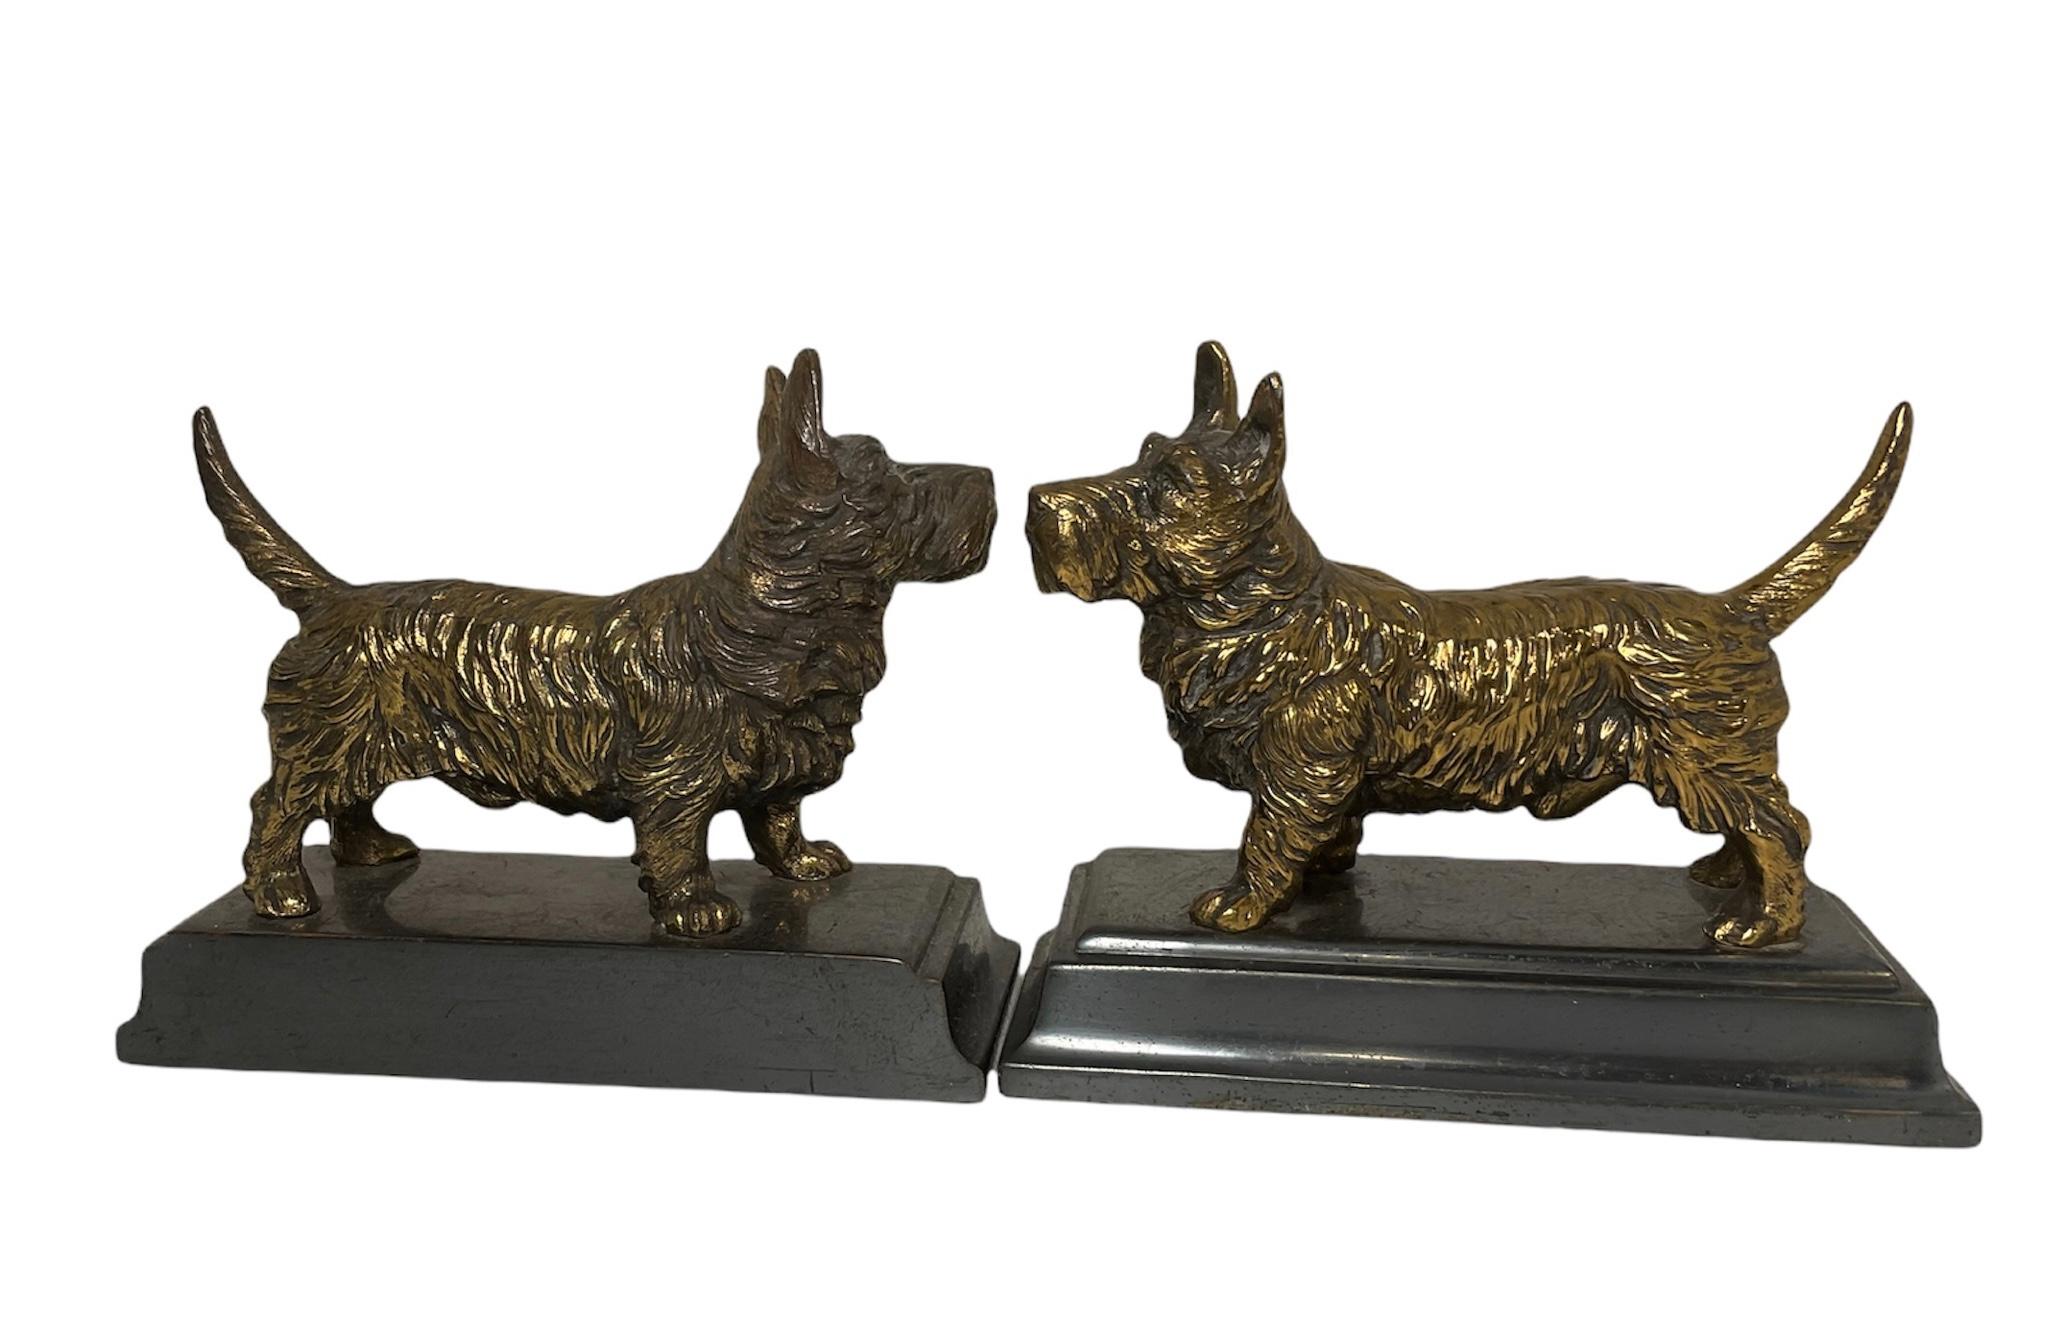 A pair of dogs bookends that stands out by the details in its making. Jennings Brothers was a metalware company in Bridgeport, Connecticut from 1890-1953. They were very well known for their high quality metalware objects (trinket boxes, frames,